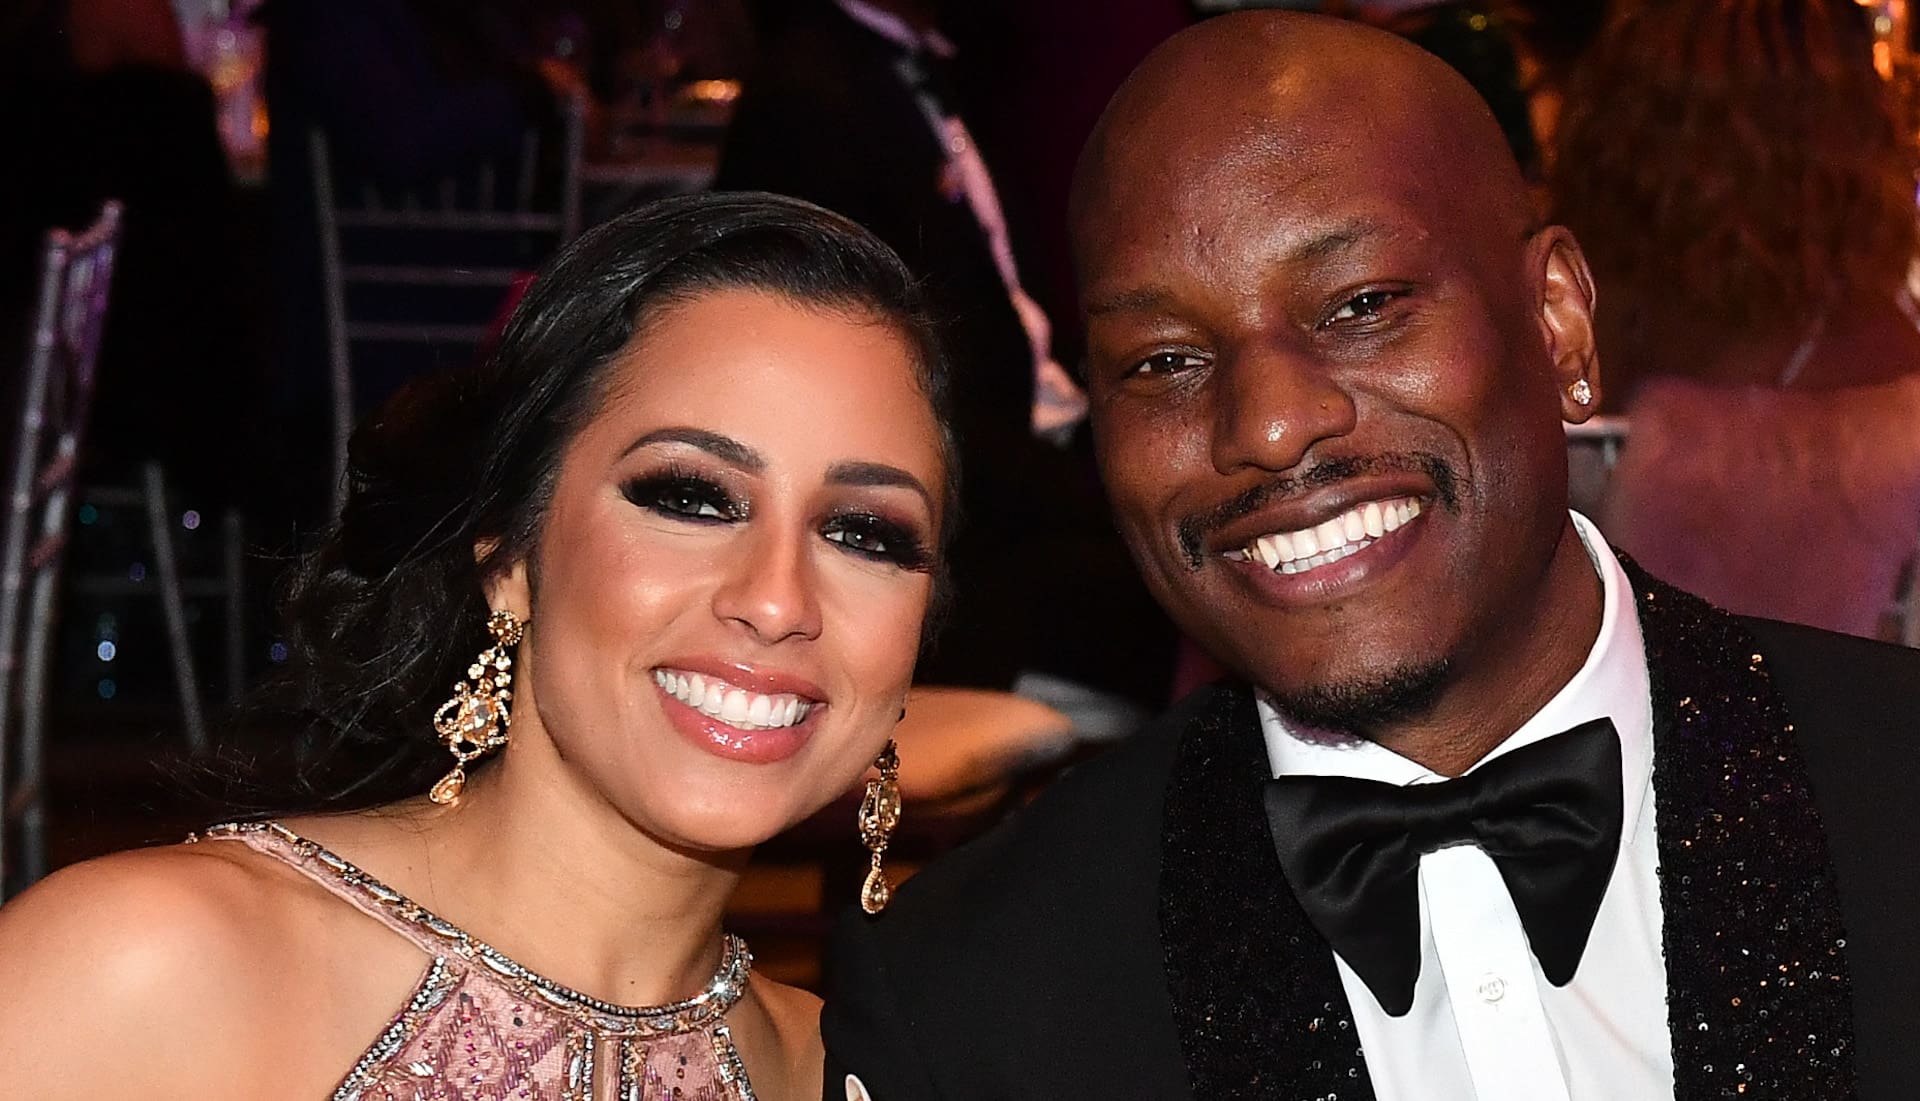 Tyrese Gibson’s Ex-Wife Samantha Lee Accuses the ‘Fast & Furious’ Actor of Failing to Pay Child Support